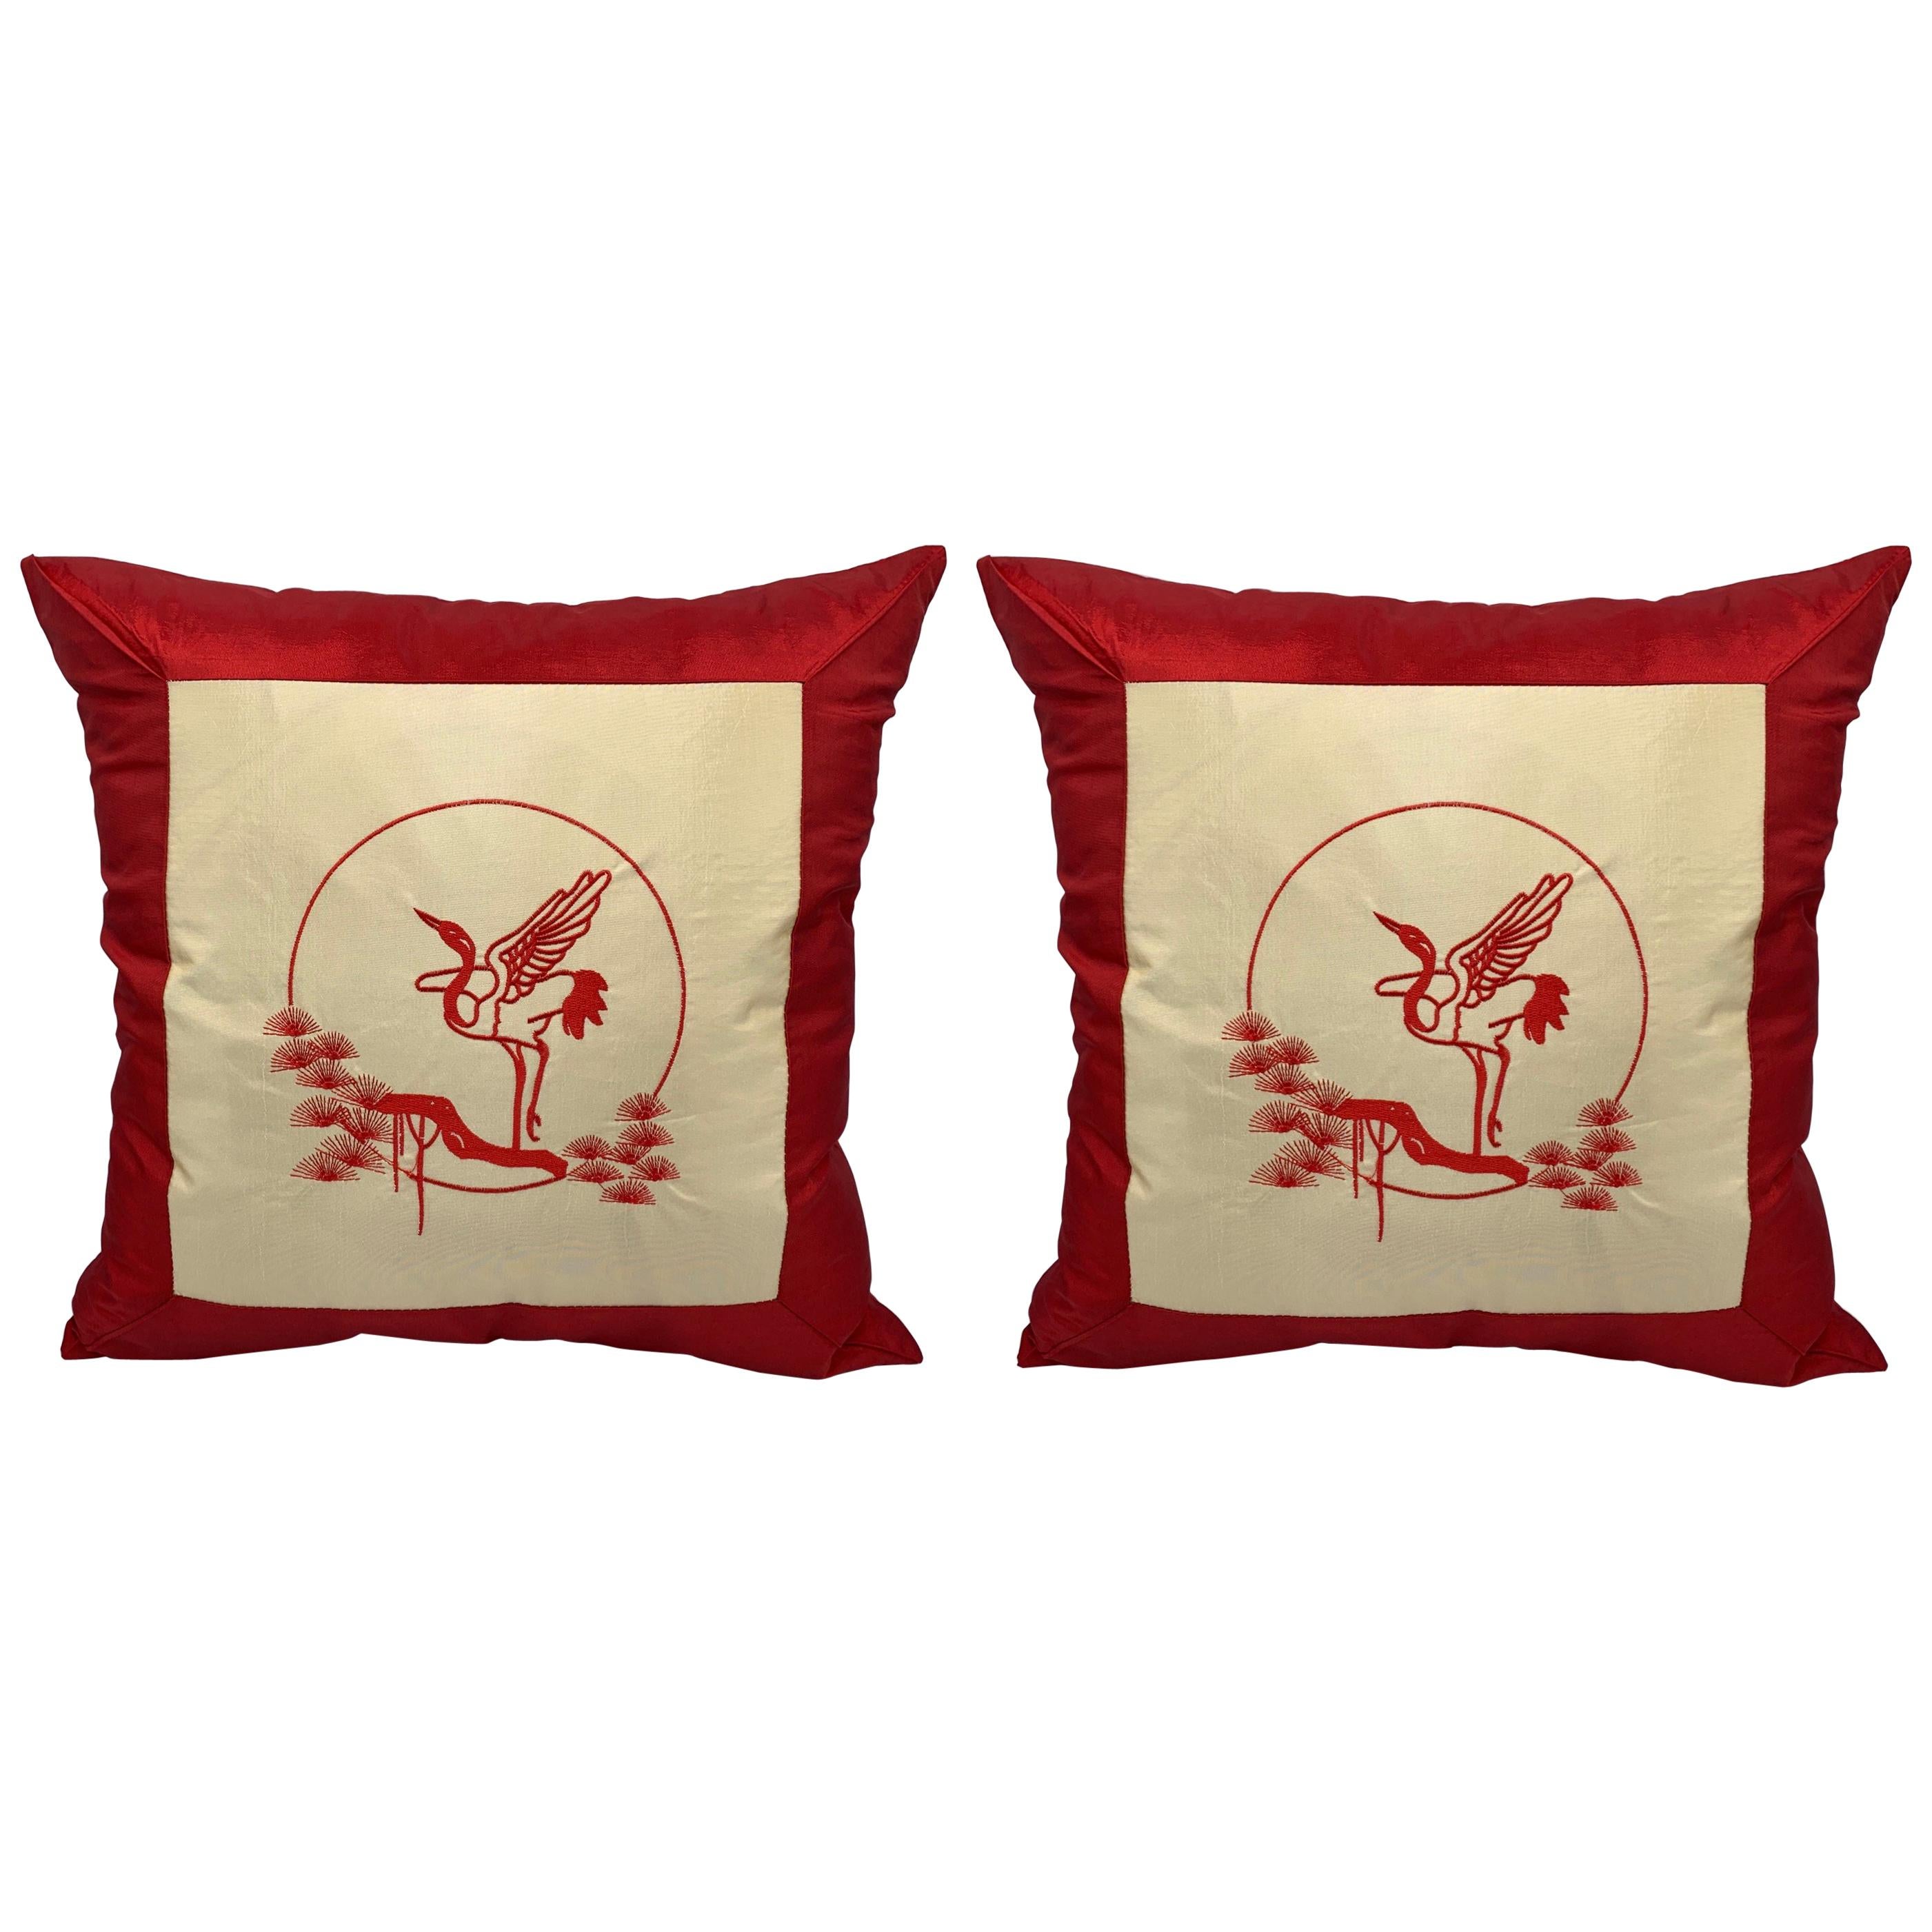 1970s Red and White Silk Pillows with Embroidered Asian Crane Motif, Pair